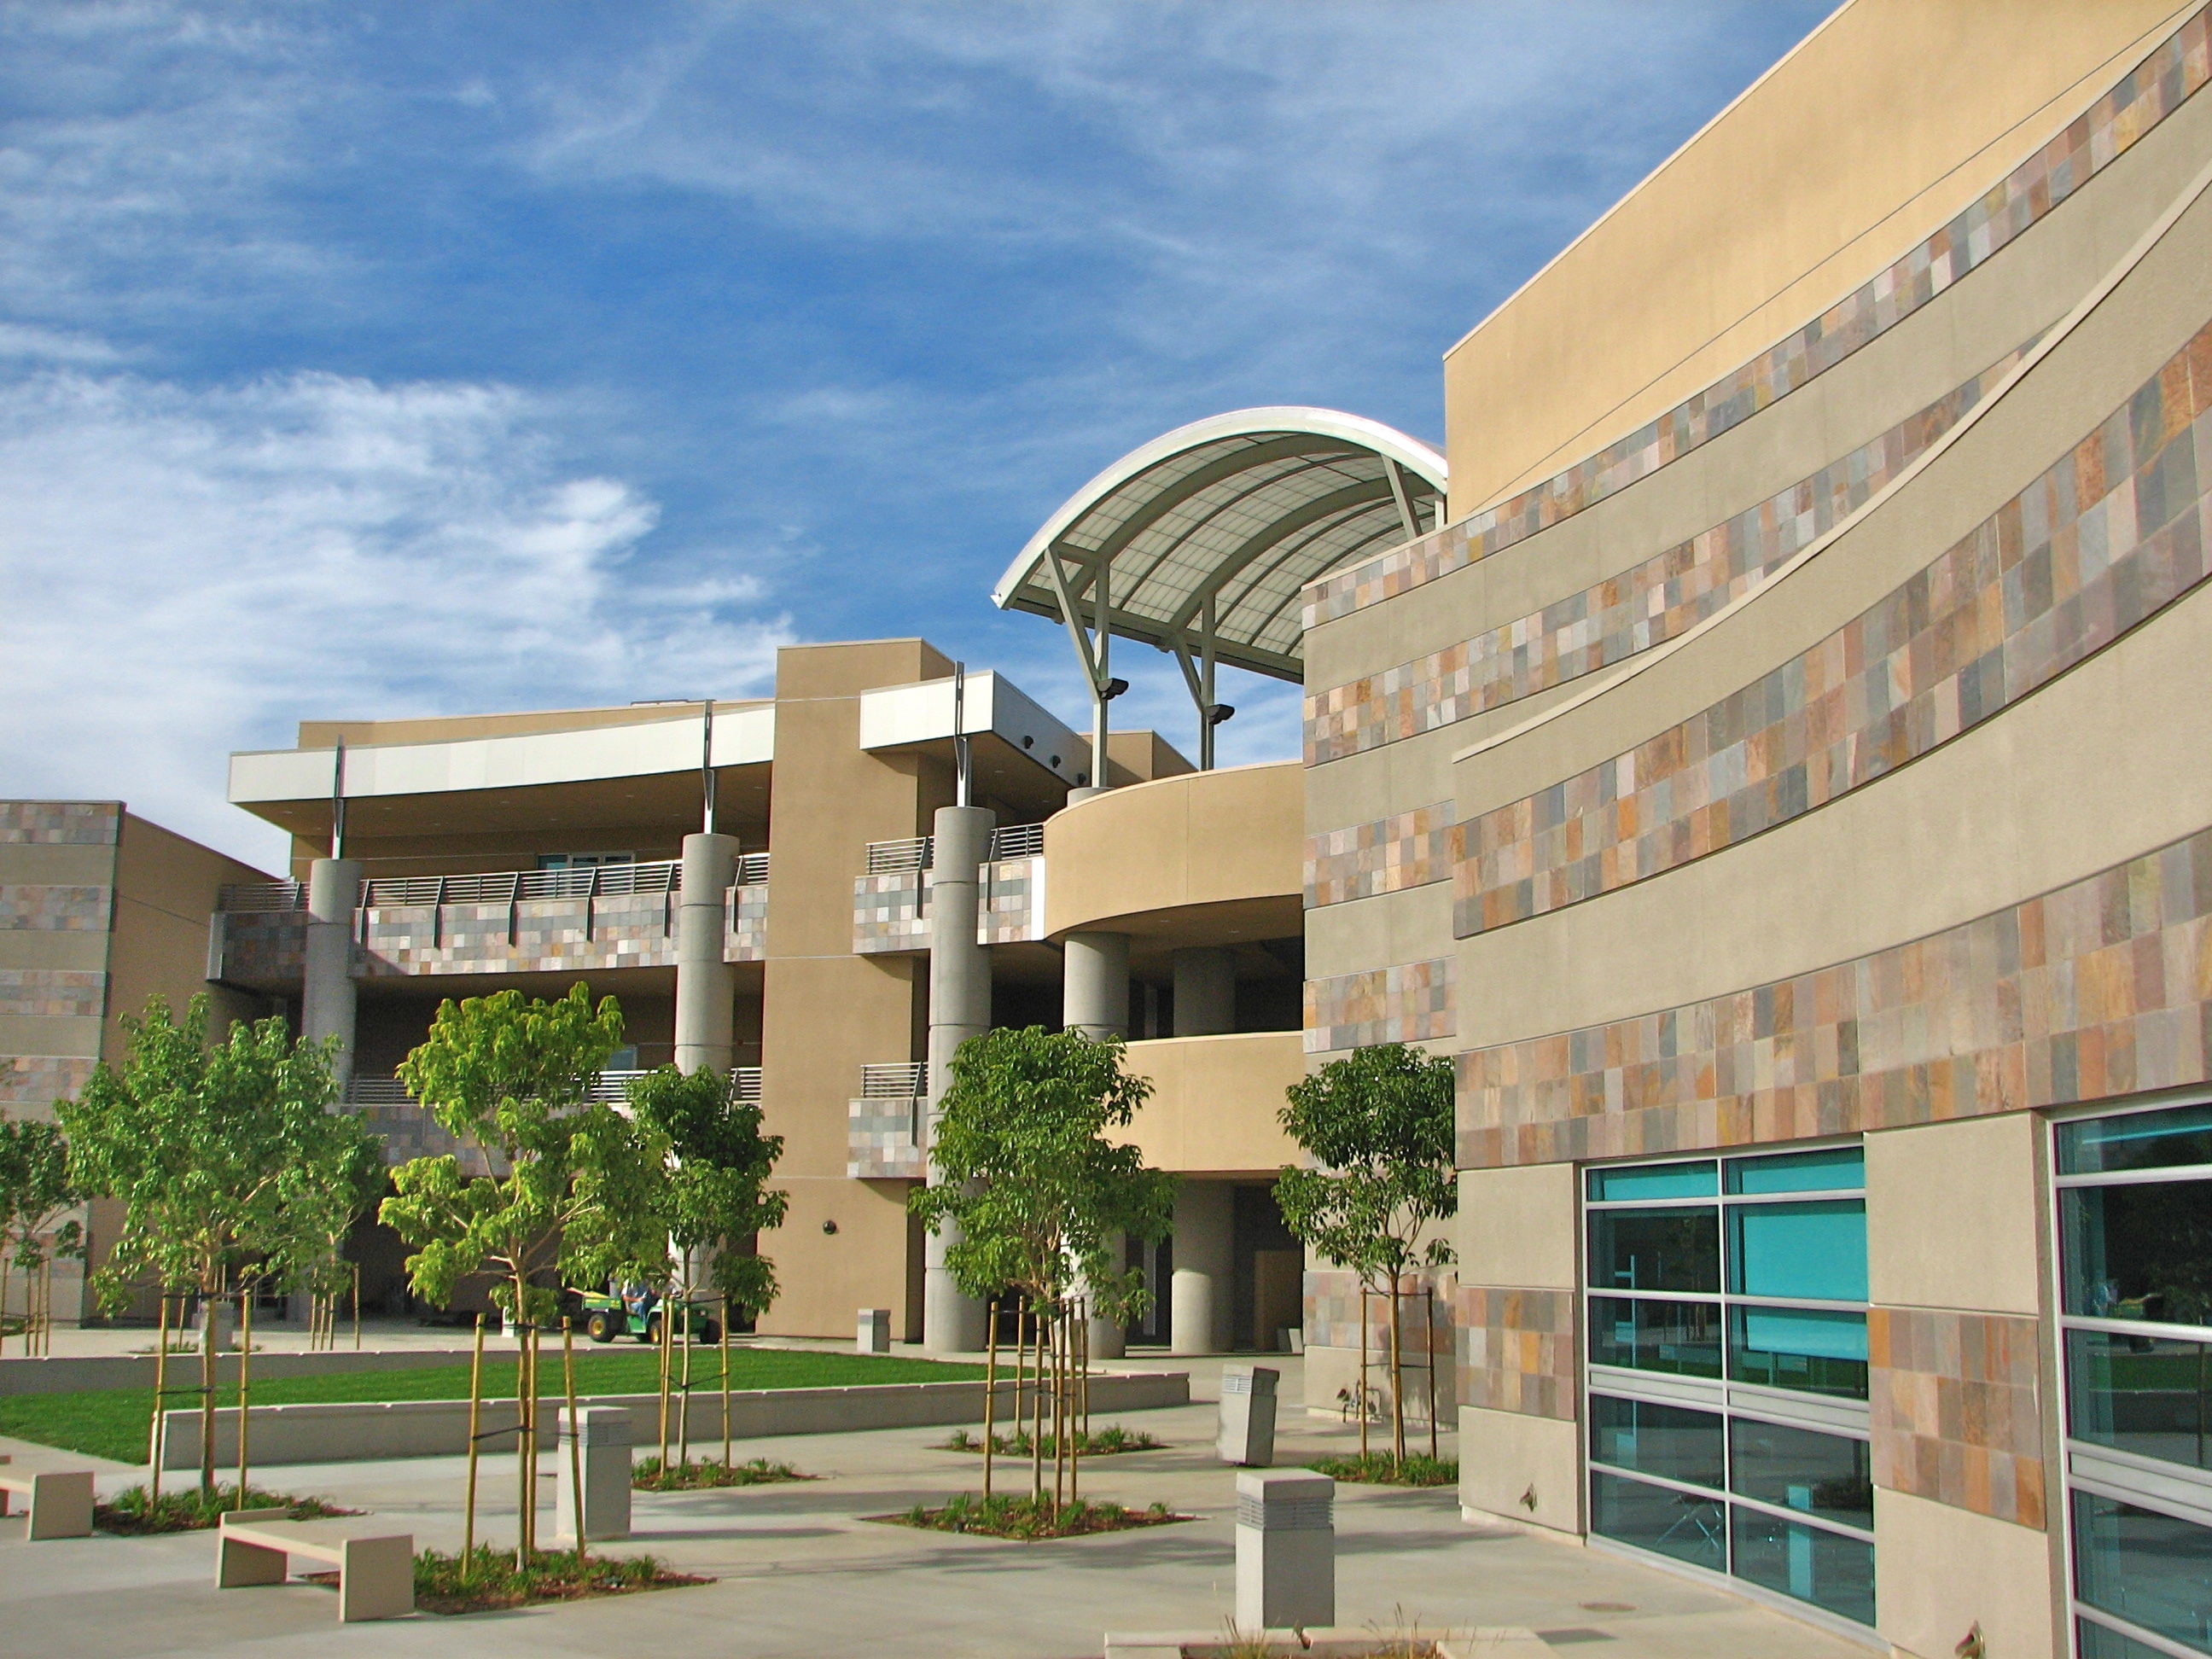 Communications Arts building at Cuyamaca College.